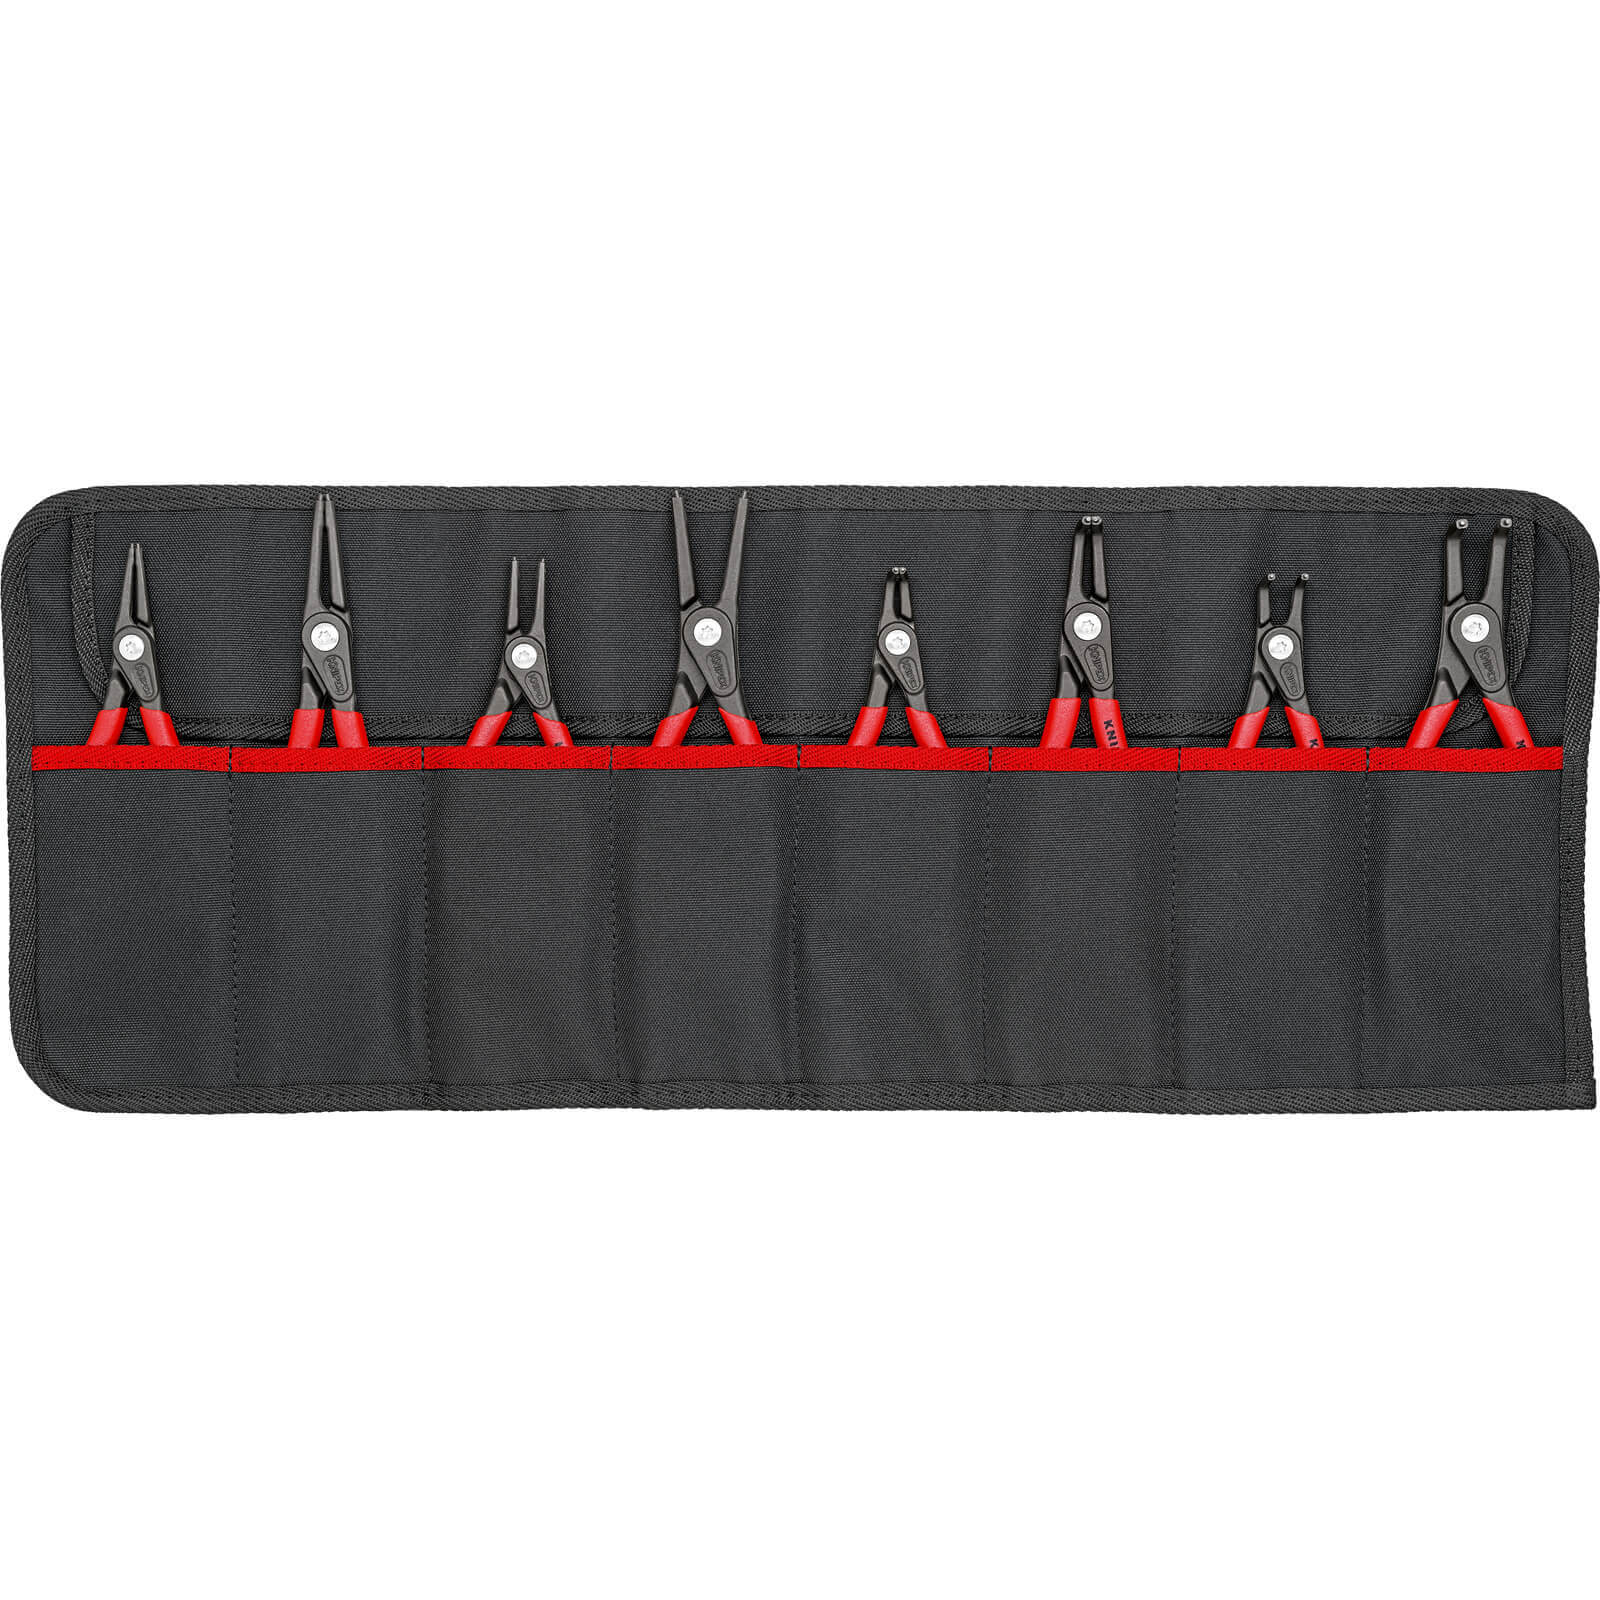 Image of Knipex 8 Piece Precision Circlip Pliers Tool Roll Set